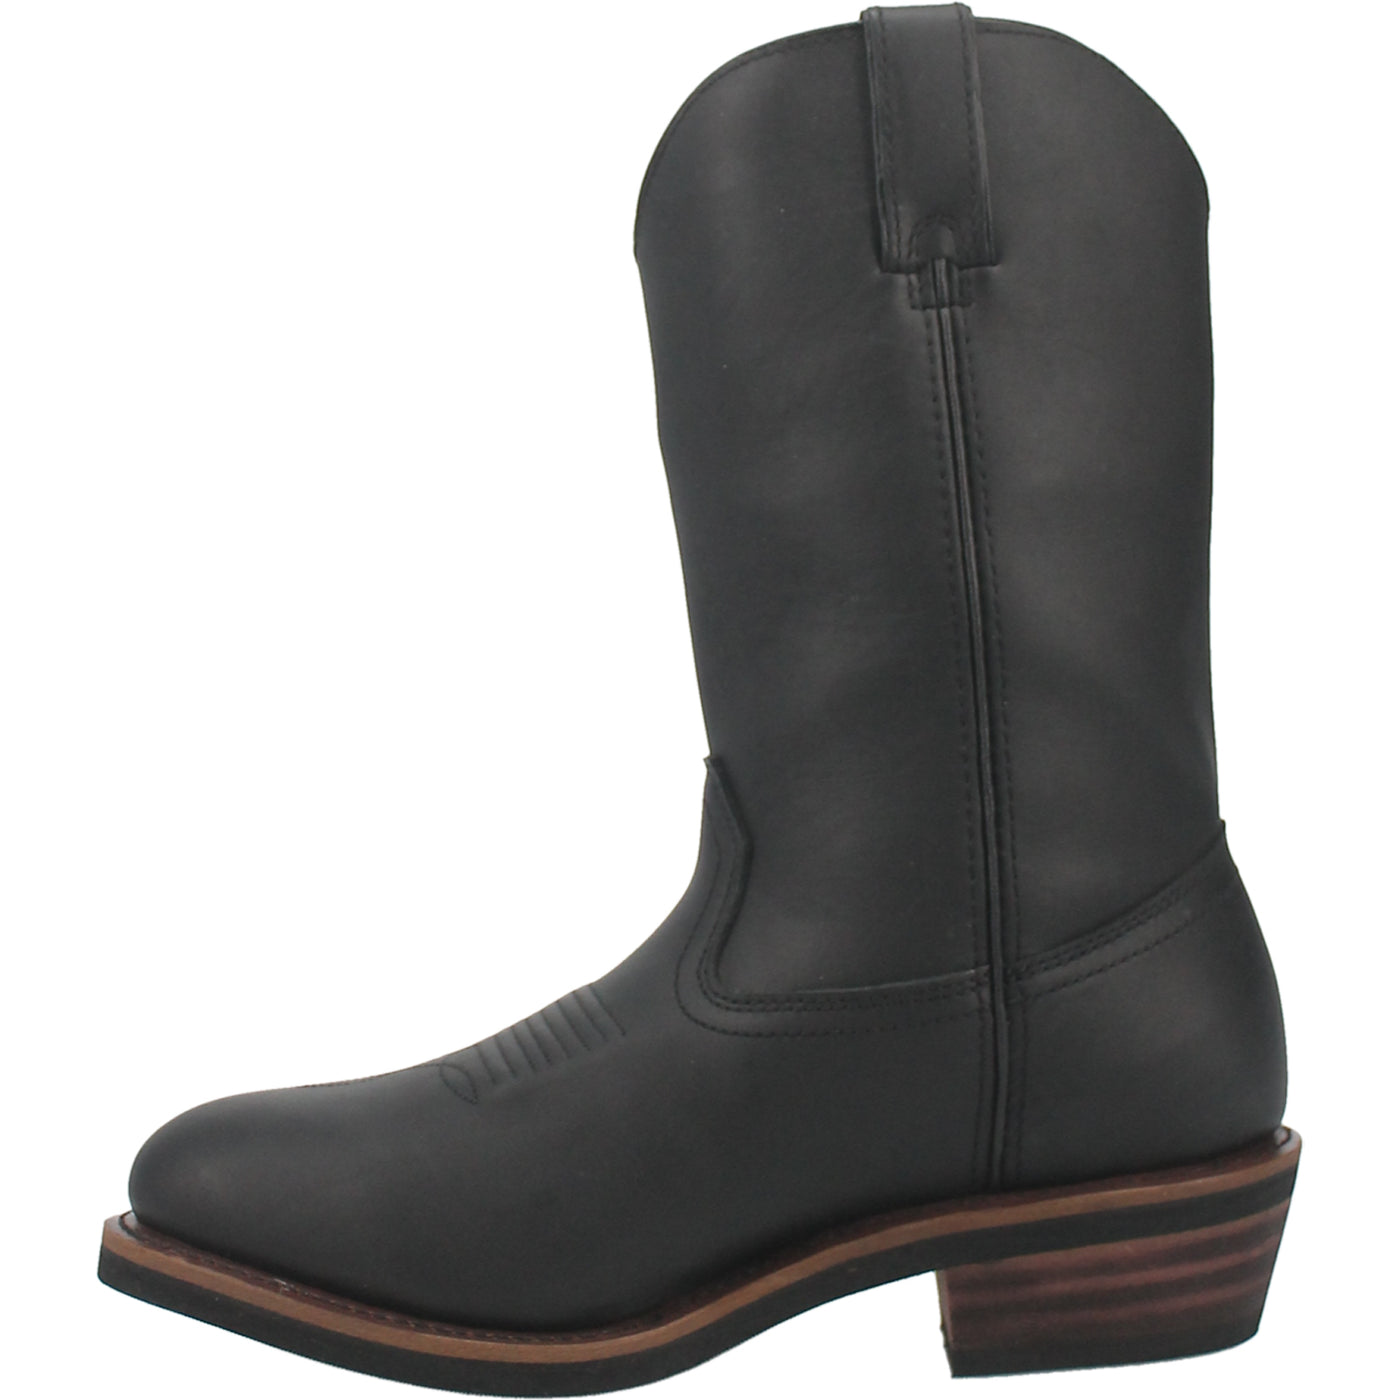 The Albuquerque in Black is popular for work or casual wear. Constructed with waterproof leather that’s lightly distressed. Also comes with a waterproof membrane bootie, Cambelle II Moisture-Wicking fabric lining, removable anti-microbial insole, and Mini-Lug Traction outsole for traction without too much tread.  Style: DP69680